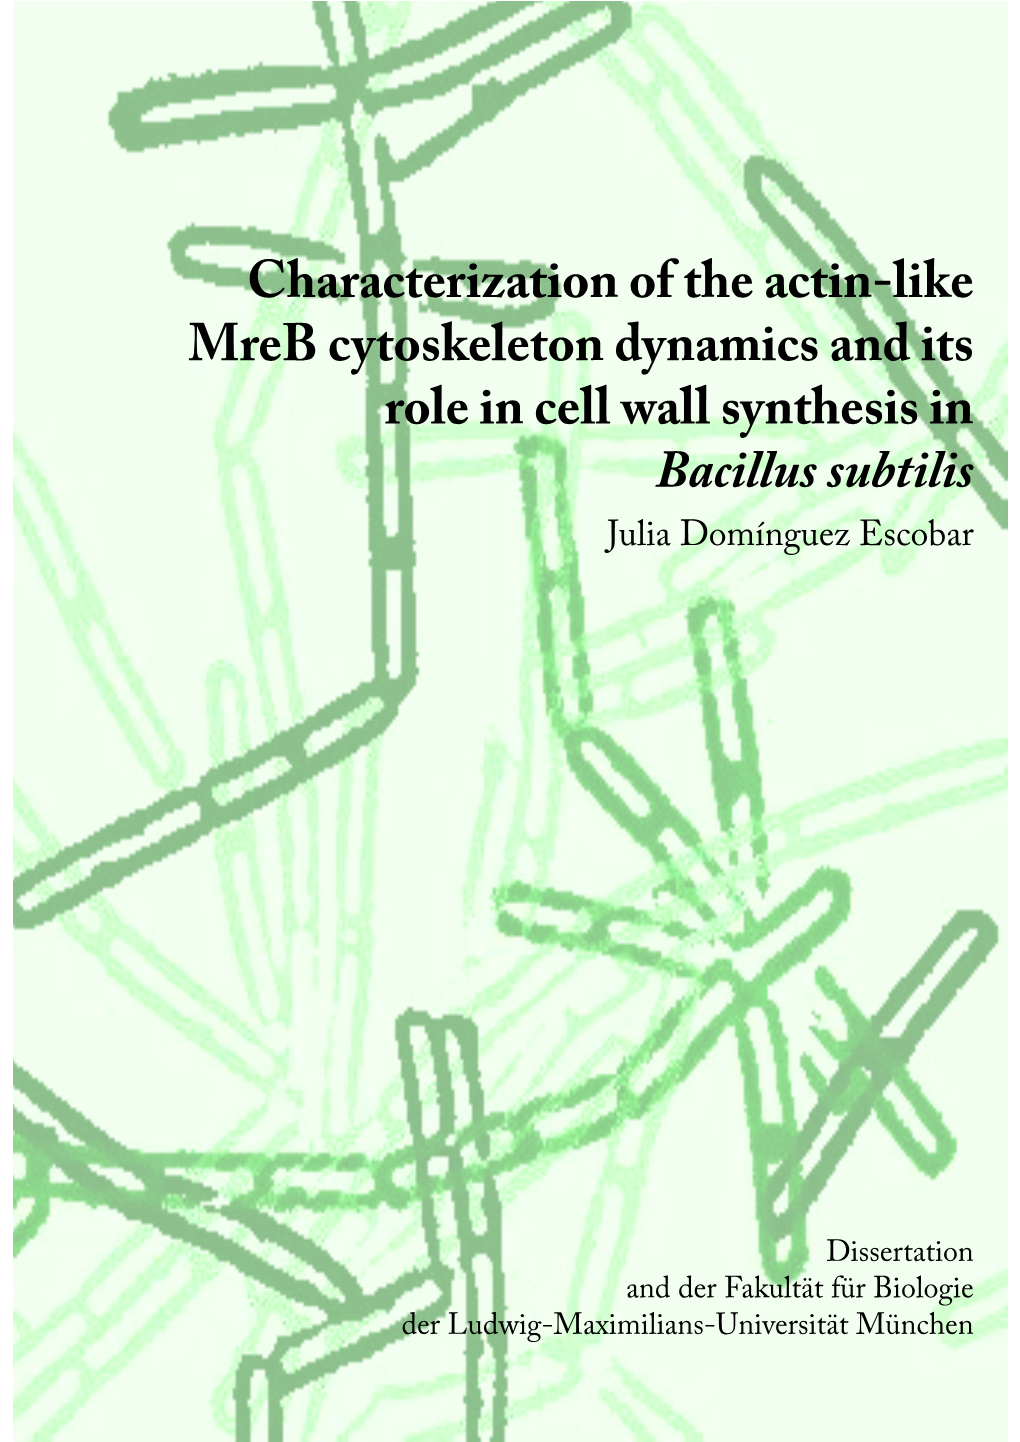 Characterization of the Actin-Like Mreb Cytoskeleton Dynamics and Its Role in Cell Wall Synthesis in Bacillus Subtilis Julia Domínguez Escobar